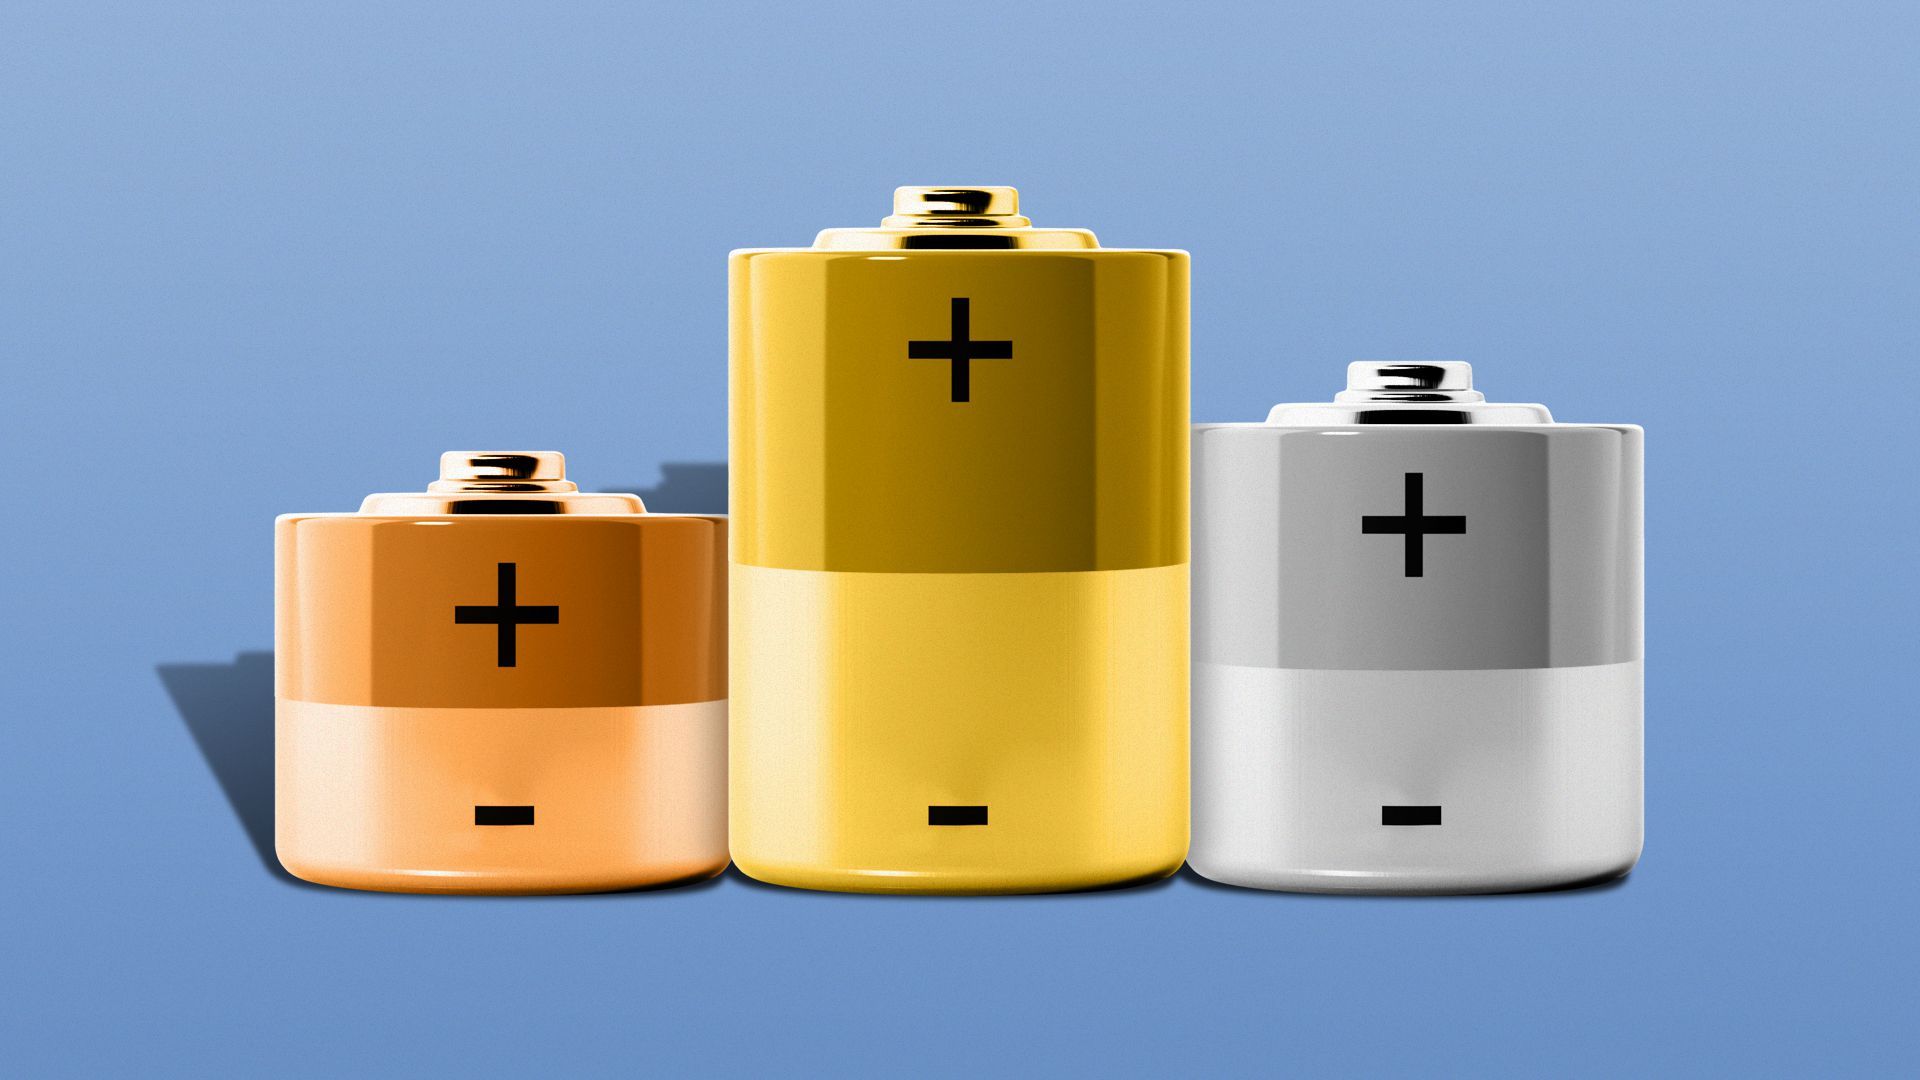 Illustration of a winners' podium made up of gold, silver and bronze batteries.